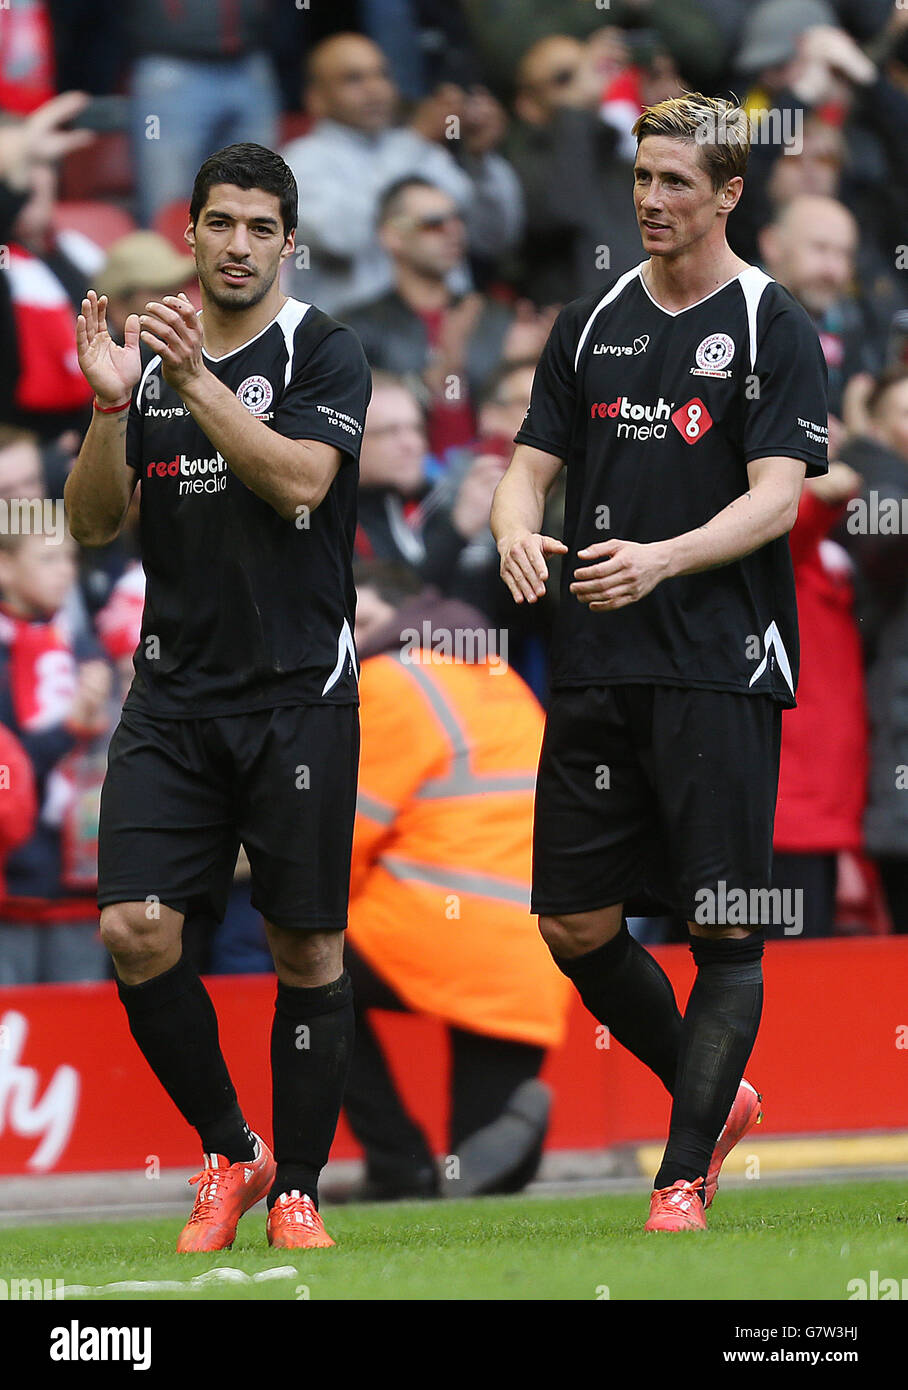 Luis Suarez (left) and Fernando Torres after the Liverpool All Stars Charity match at Anfield, Liverpool. Stock Photo